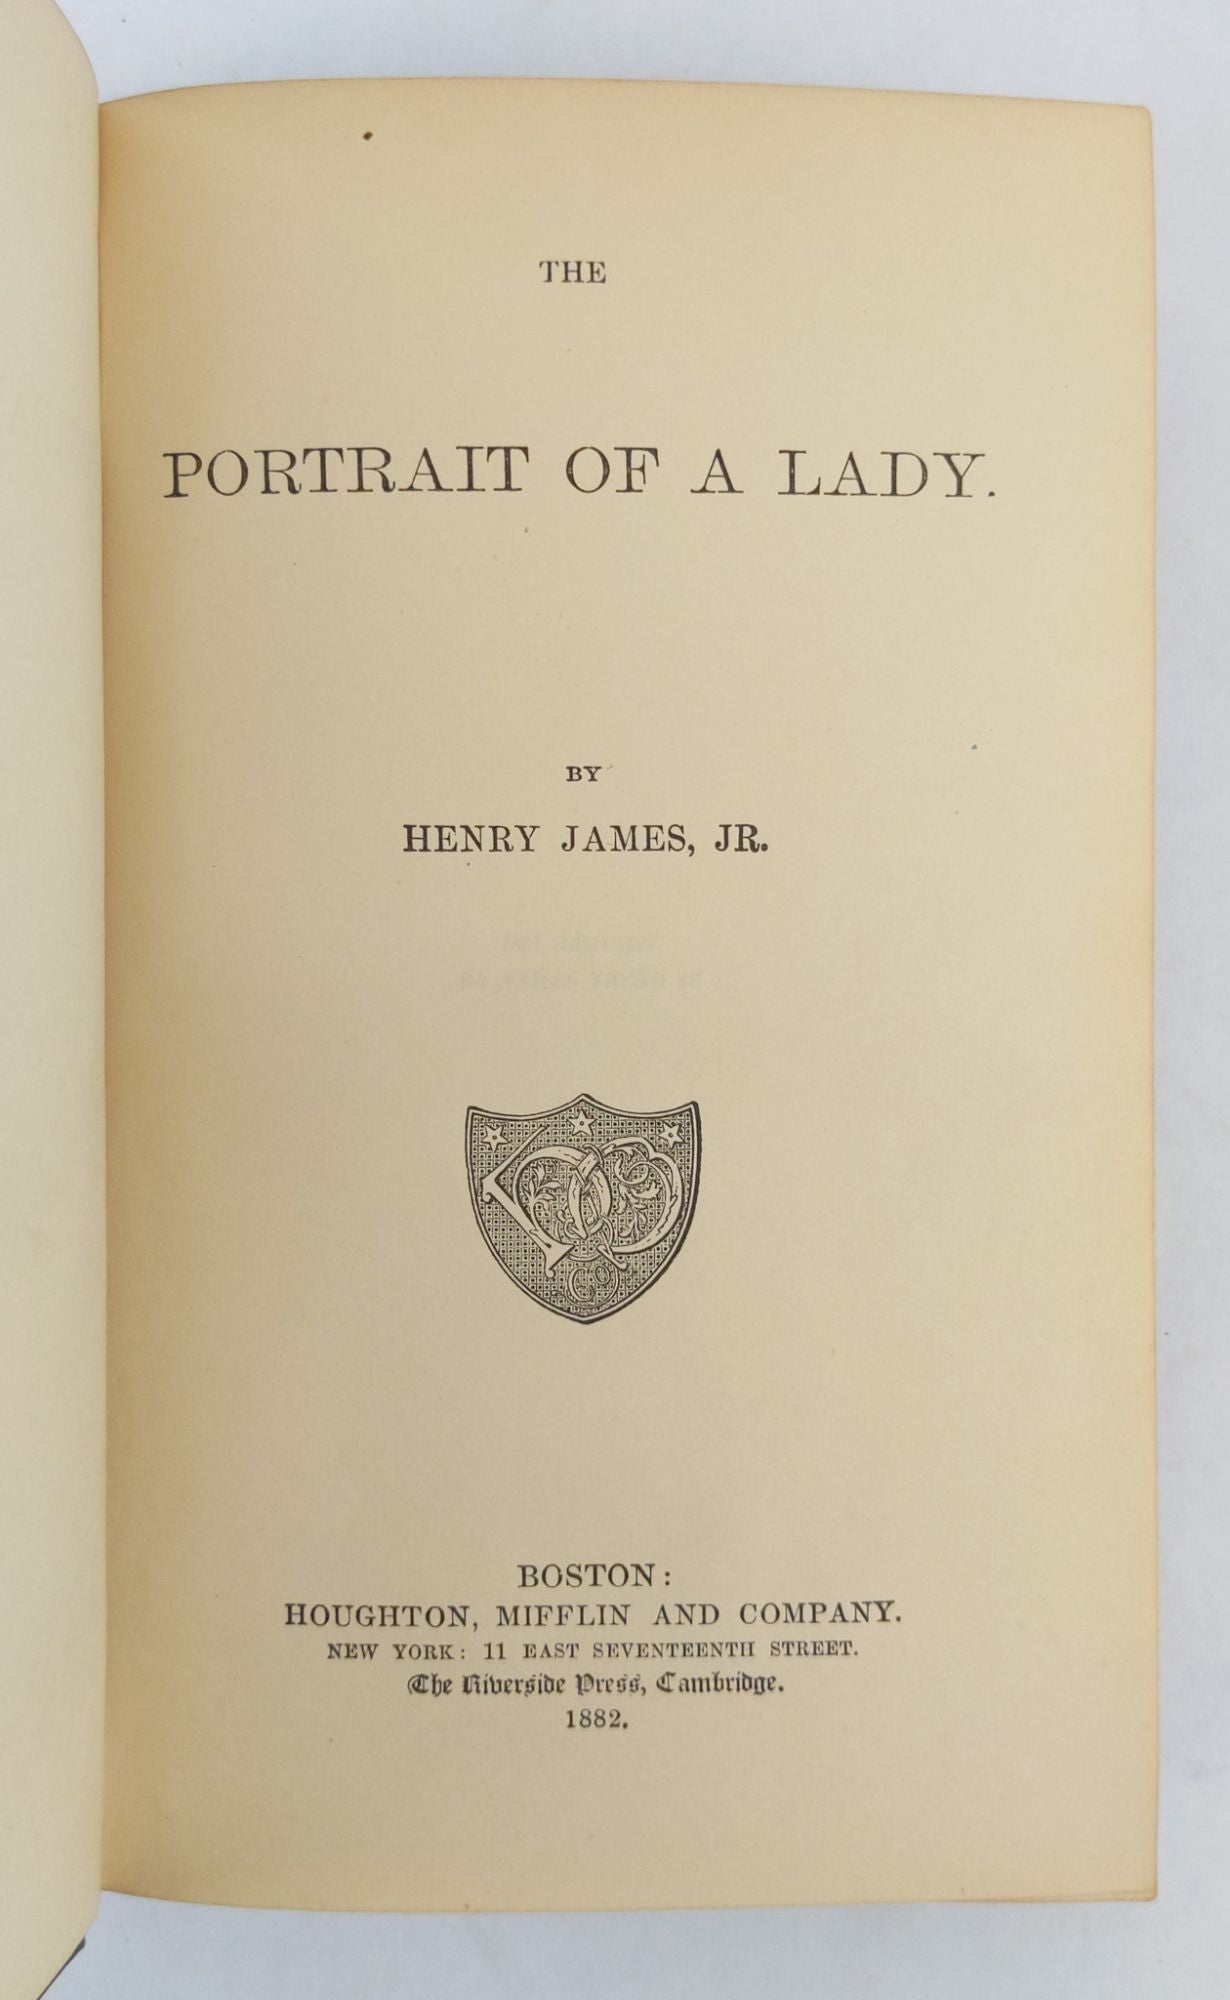 Product Image for THE PORTRAIT OF A LADY